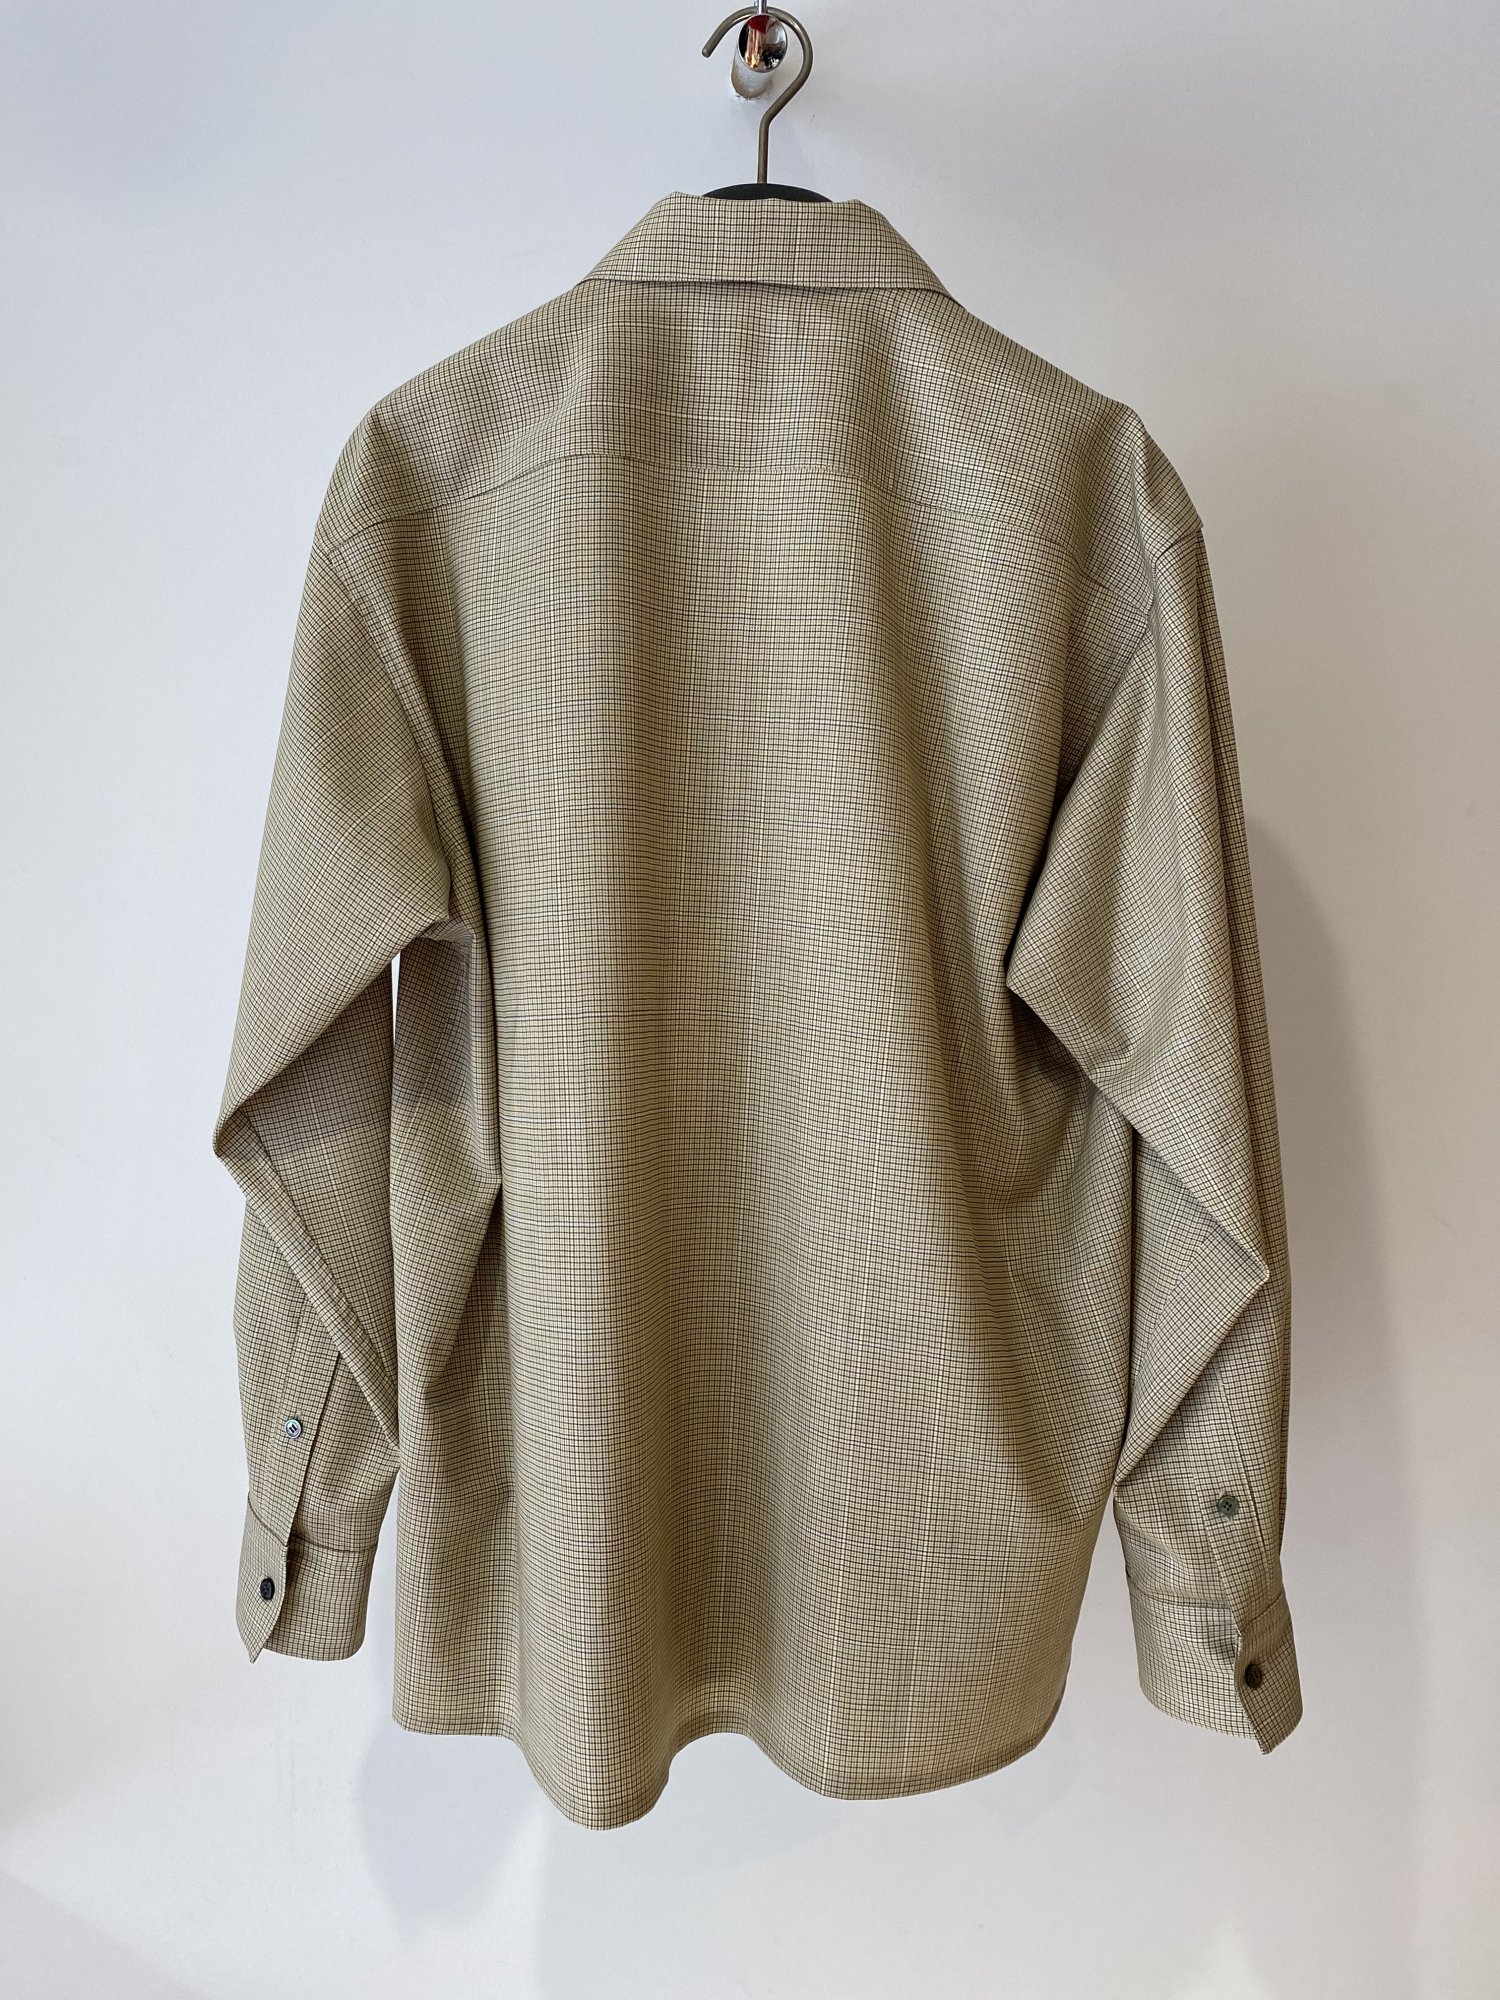 LITTLEBIG<br />[30%off] Wool Checked L/S SH / Beige<img class='new_mark_img2' src='https://img.shop-pro.jp/img/new/icons20.gif' style='border:none;display:inline;margin:0px;padding:0px;width:auto;' />